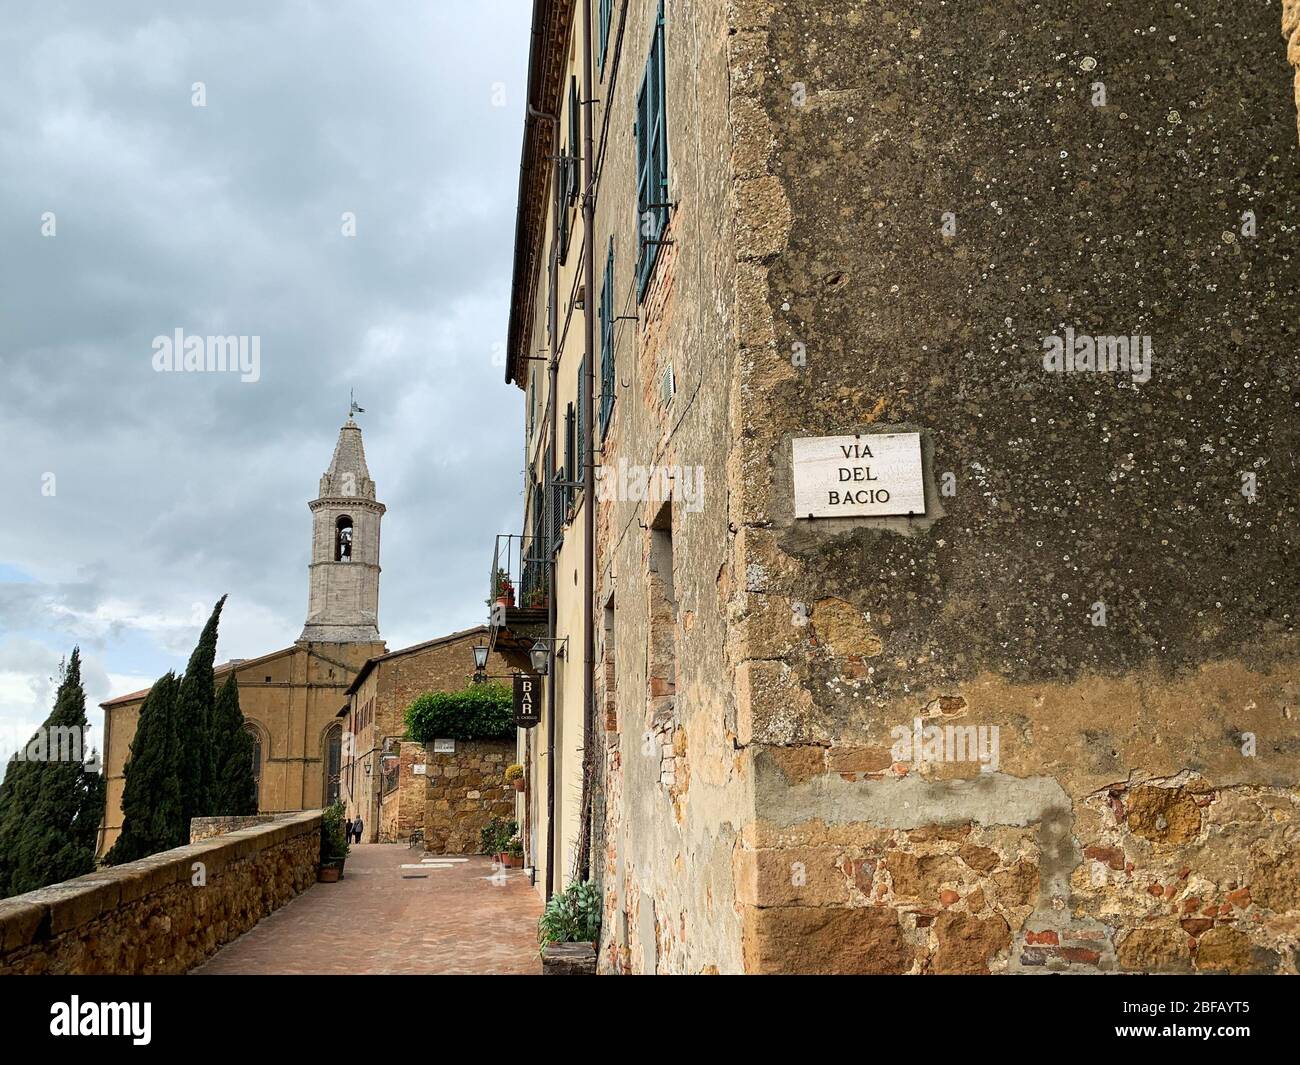 The way of the Kiss ( 'via del bacio' in Italian) is located in the beautiful town of Pienza in Tuscany, Italy. Stock Photo